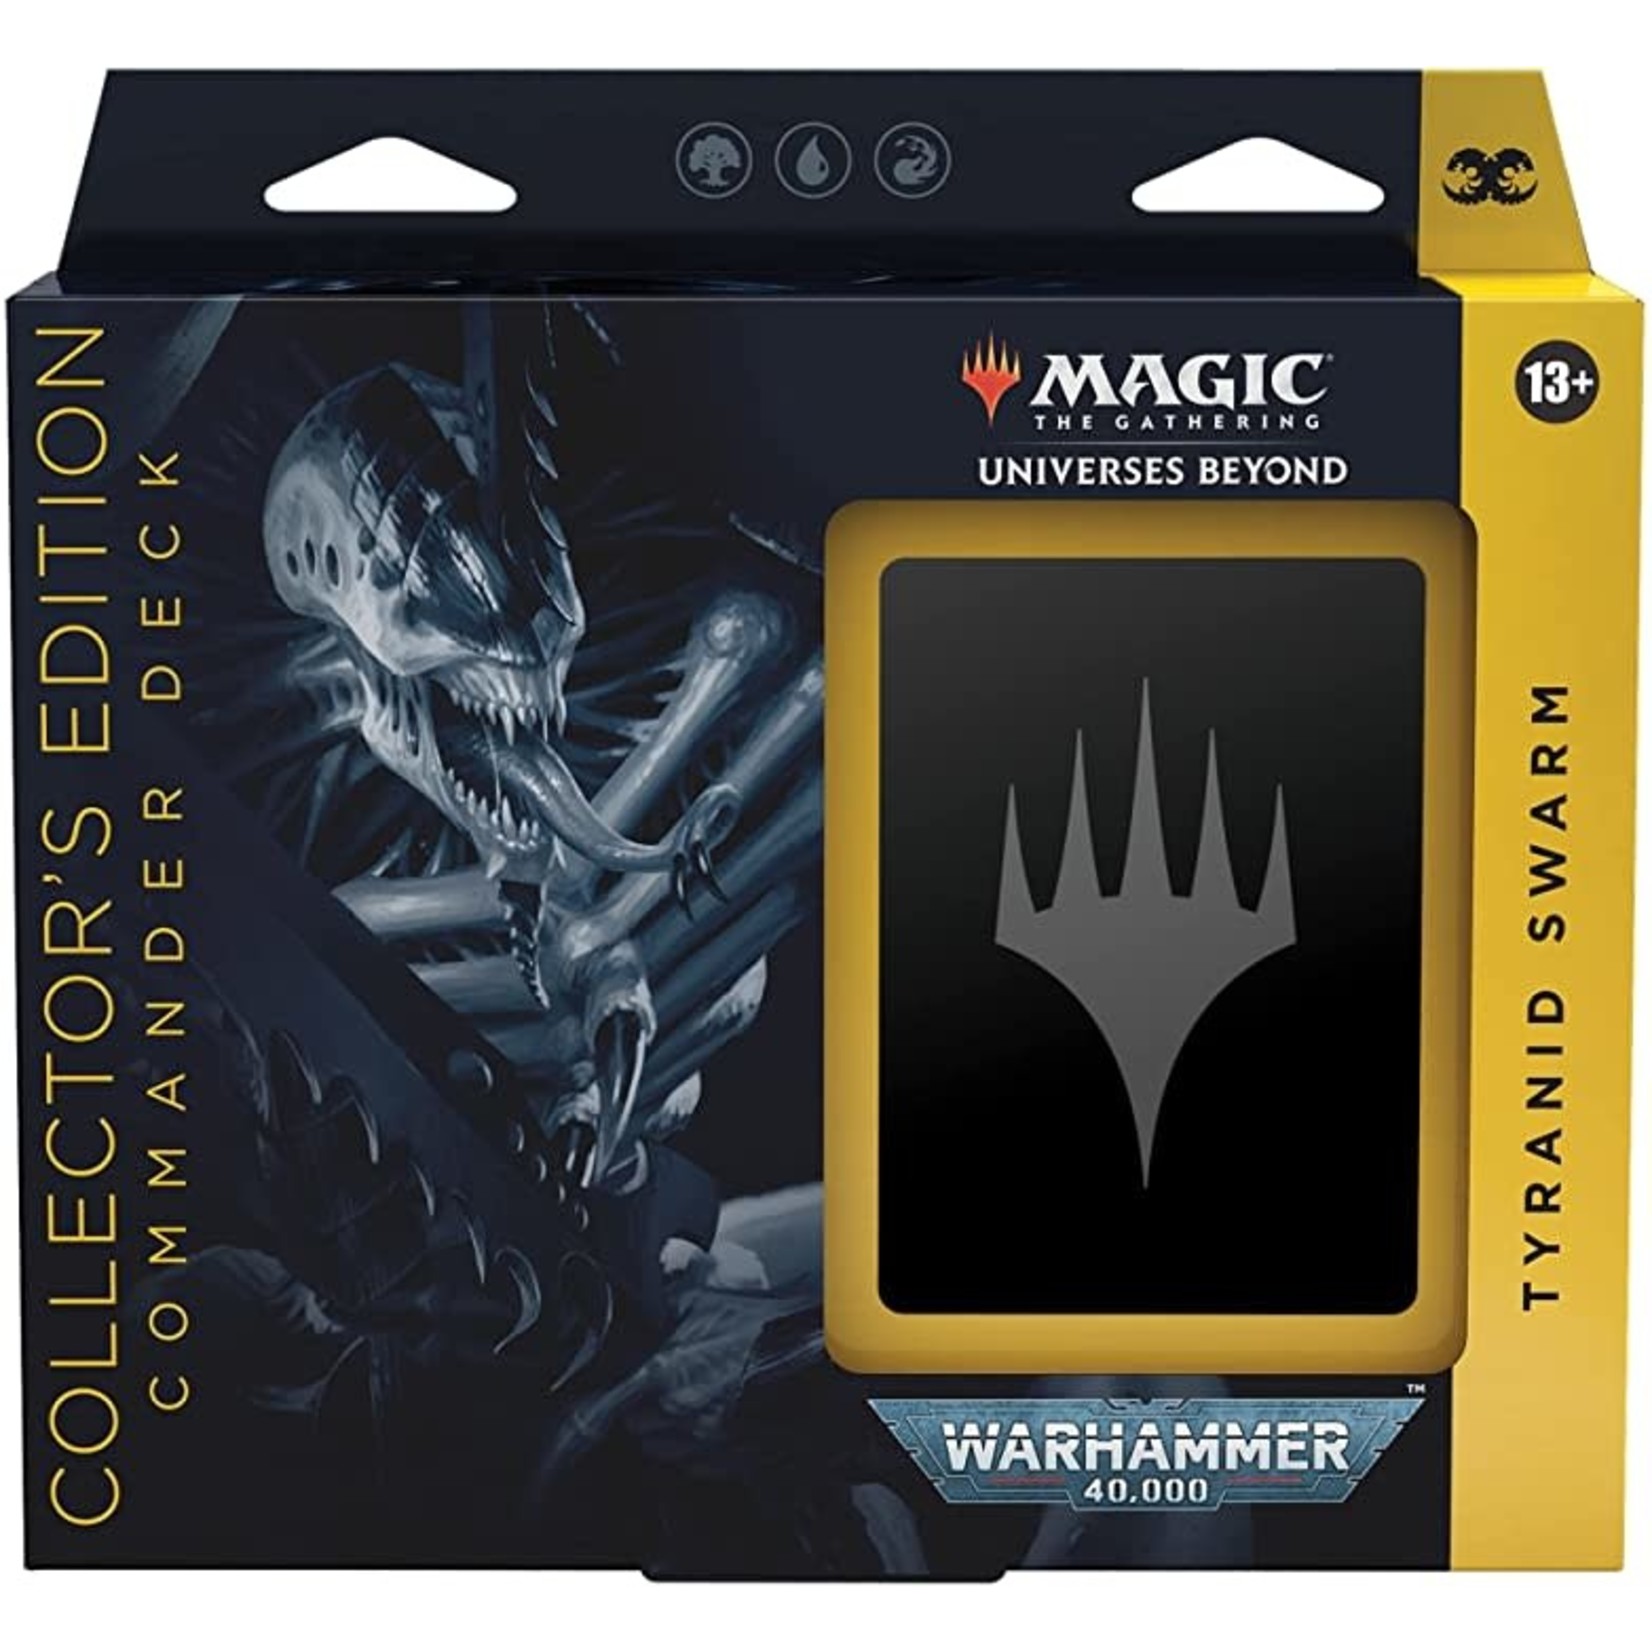 Magic: The Gathering Magic: The Gathering – Warhammer 40,000 Collector's Edition Commander Deck Bundle